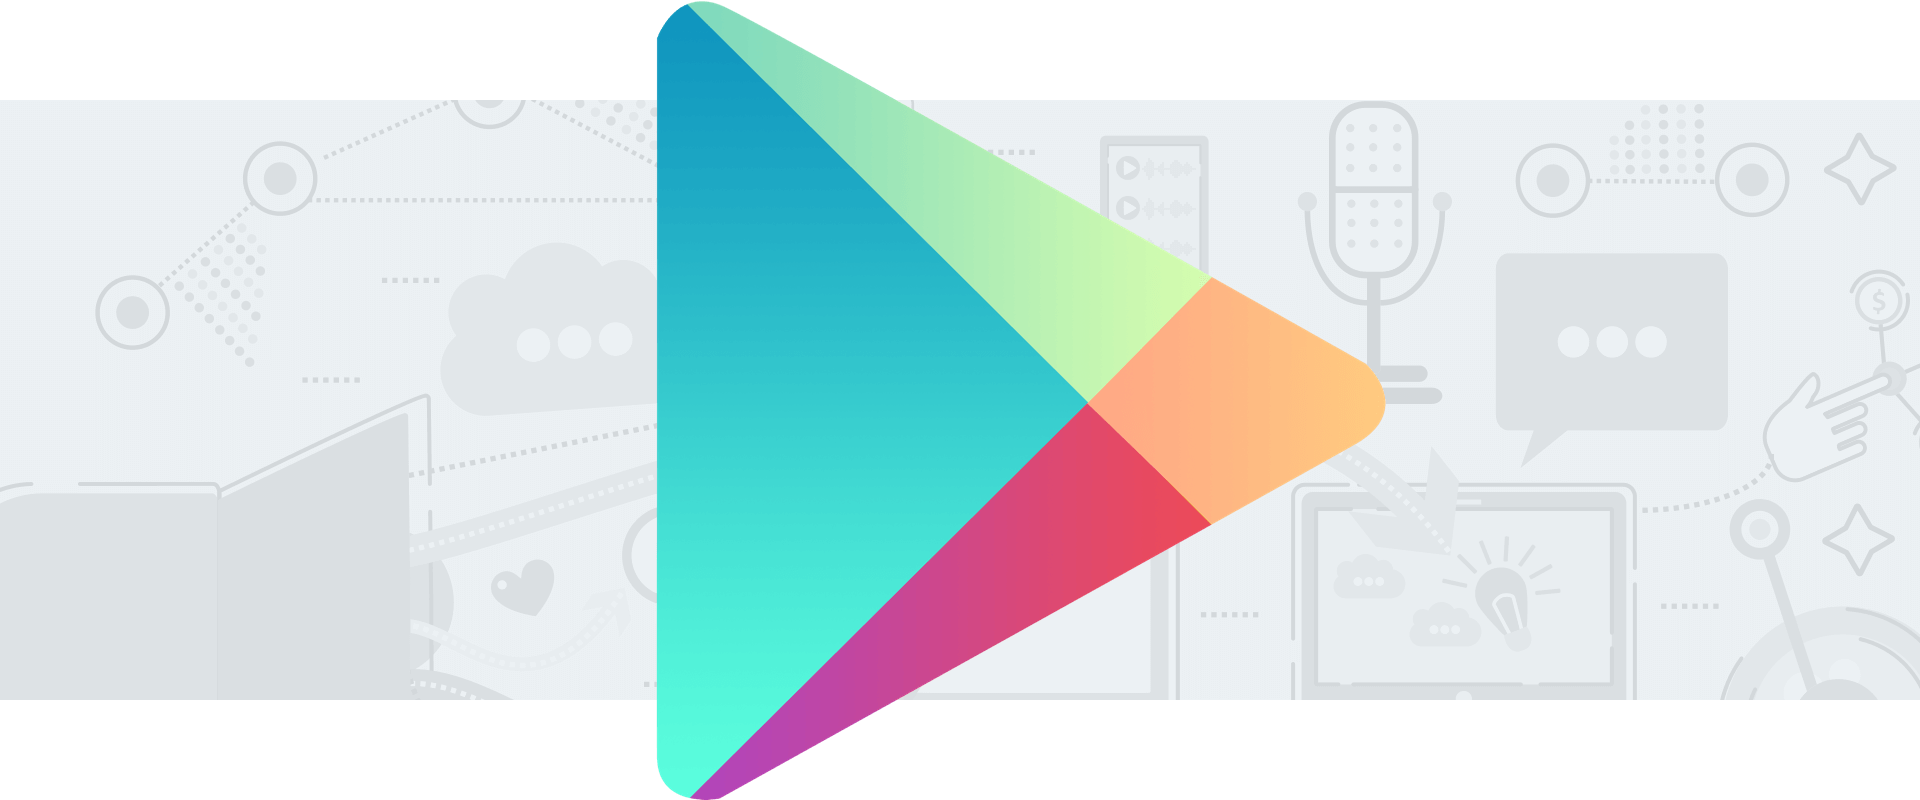 Google Play Podcast Logo - How to Submit Your Podcast to Google Play Music